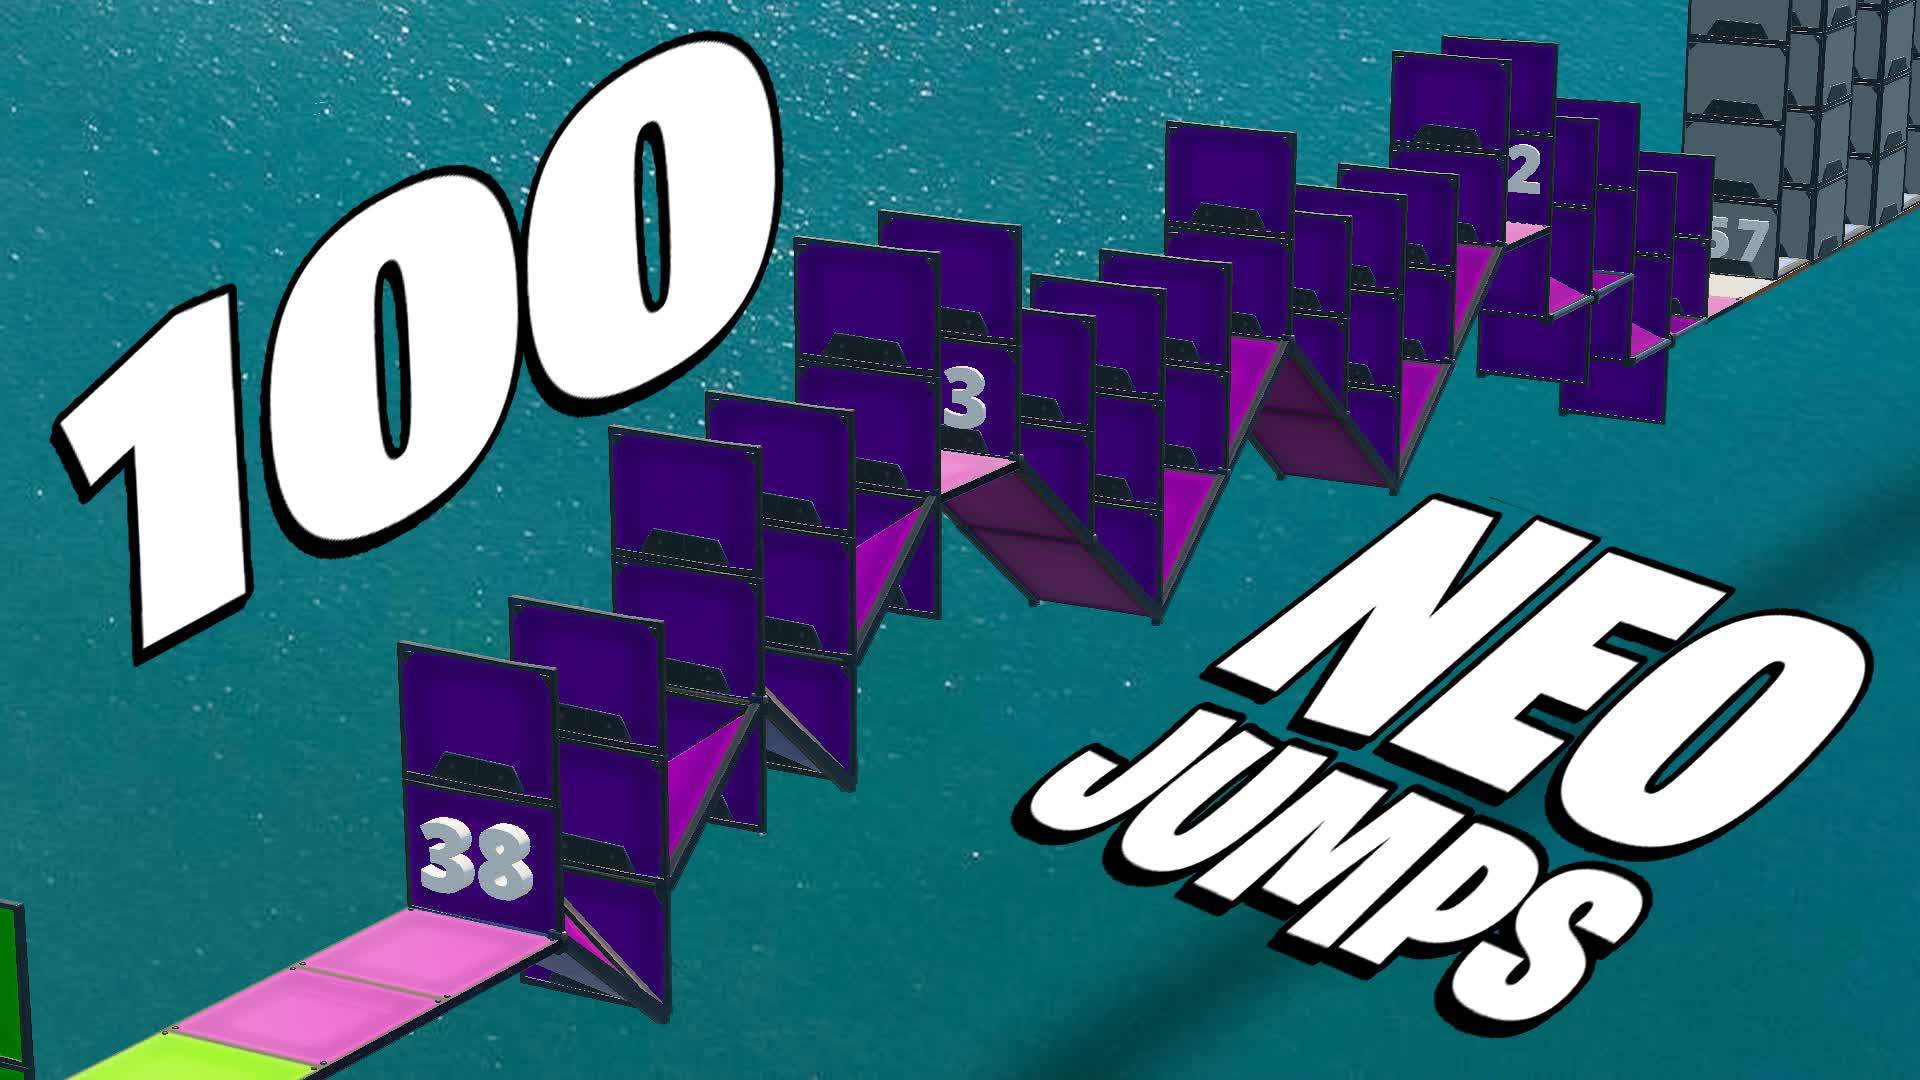 ⭐100 NEO JUMPS⭐